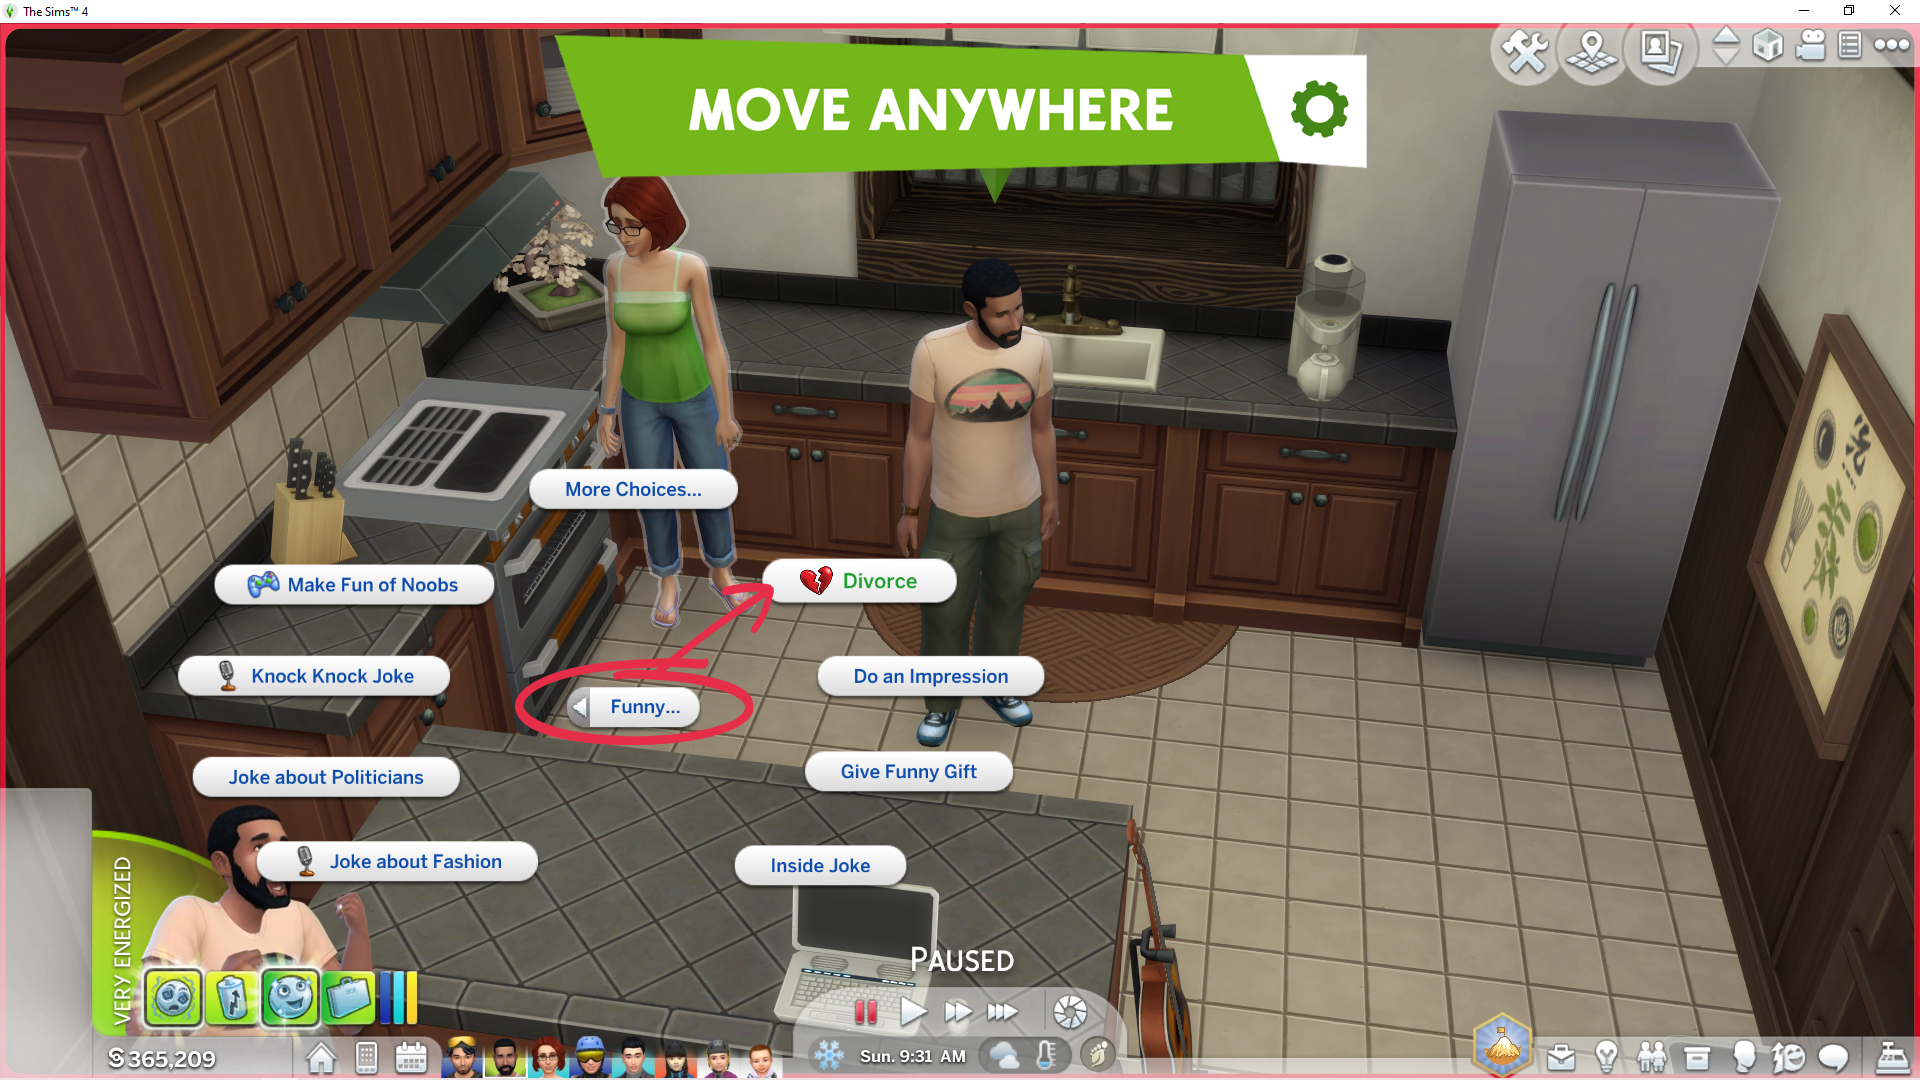 Mod The Sims - [Script Mod] enable advanced debug/cheat interactions